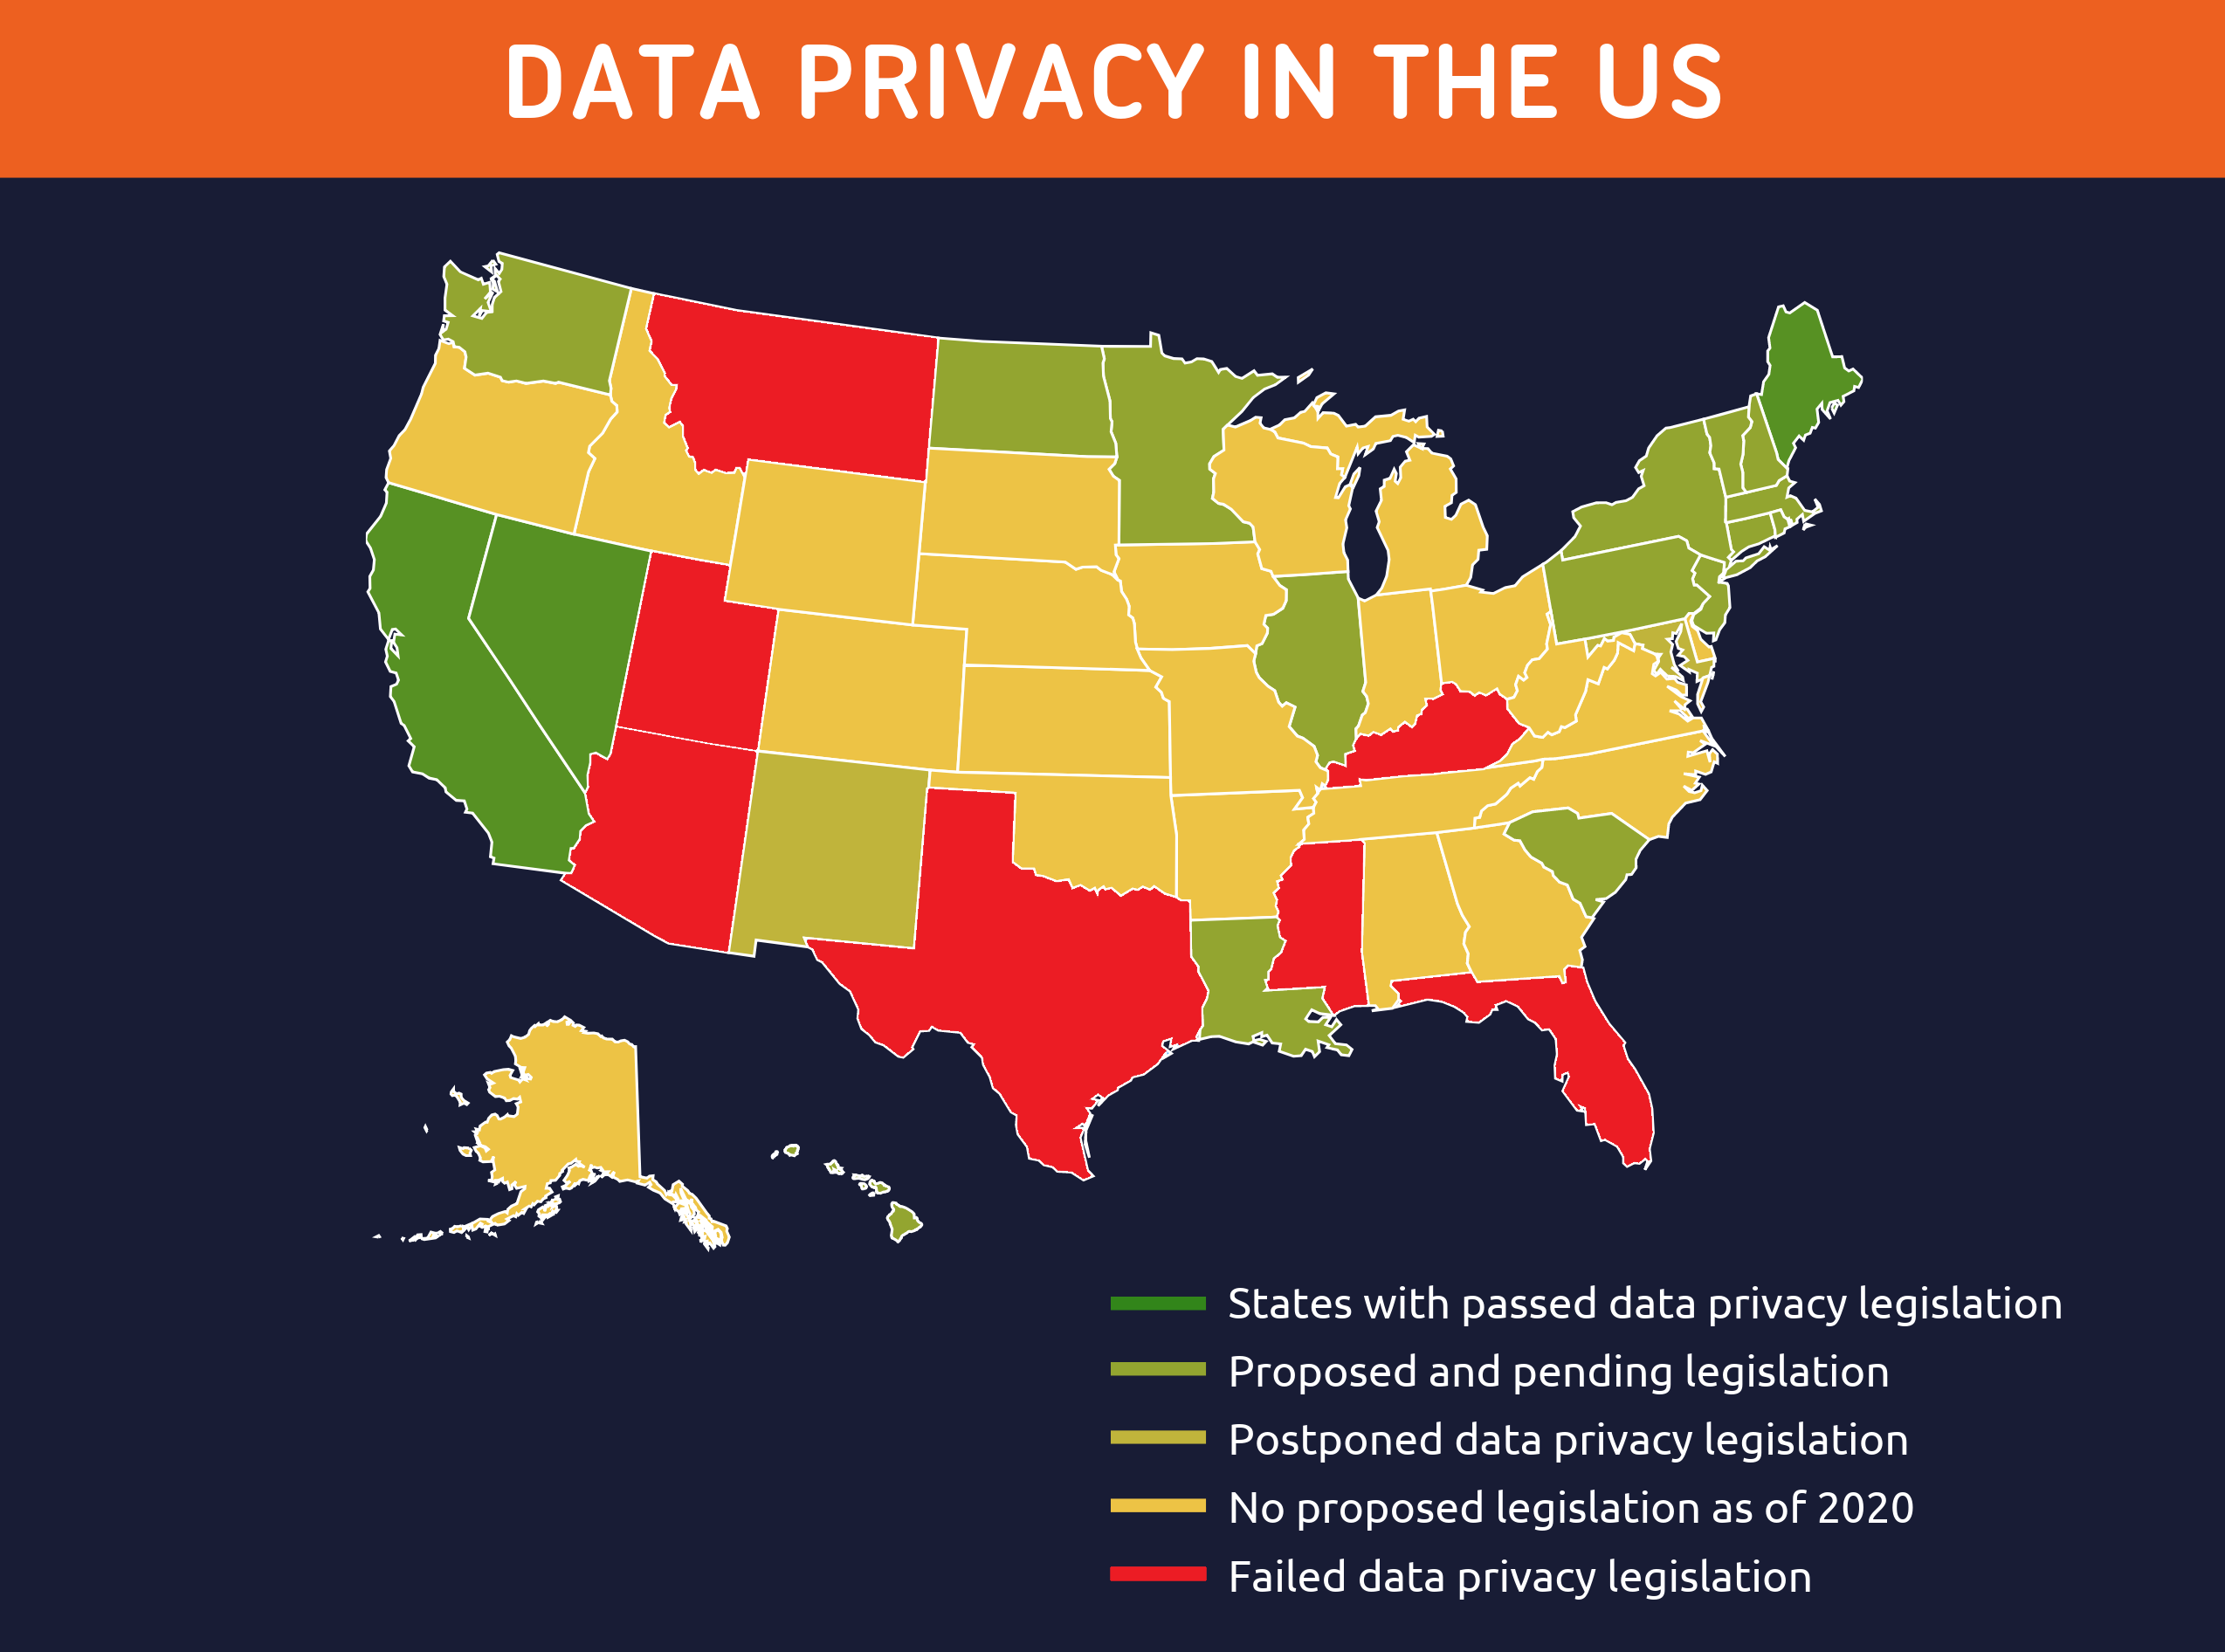 Summary of US Data Privacy Laws